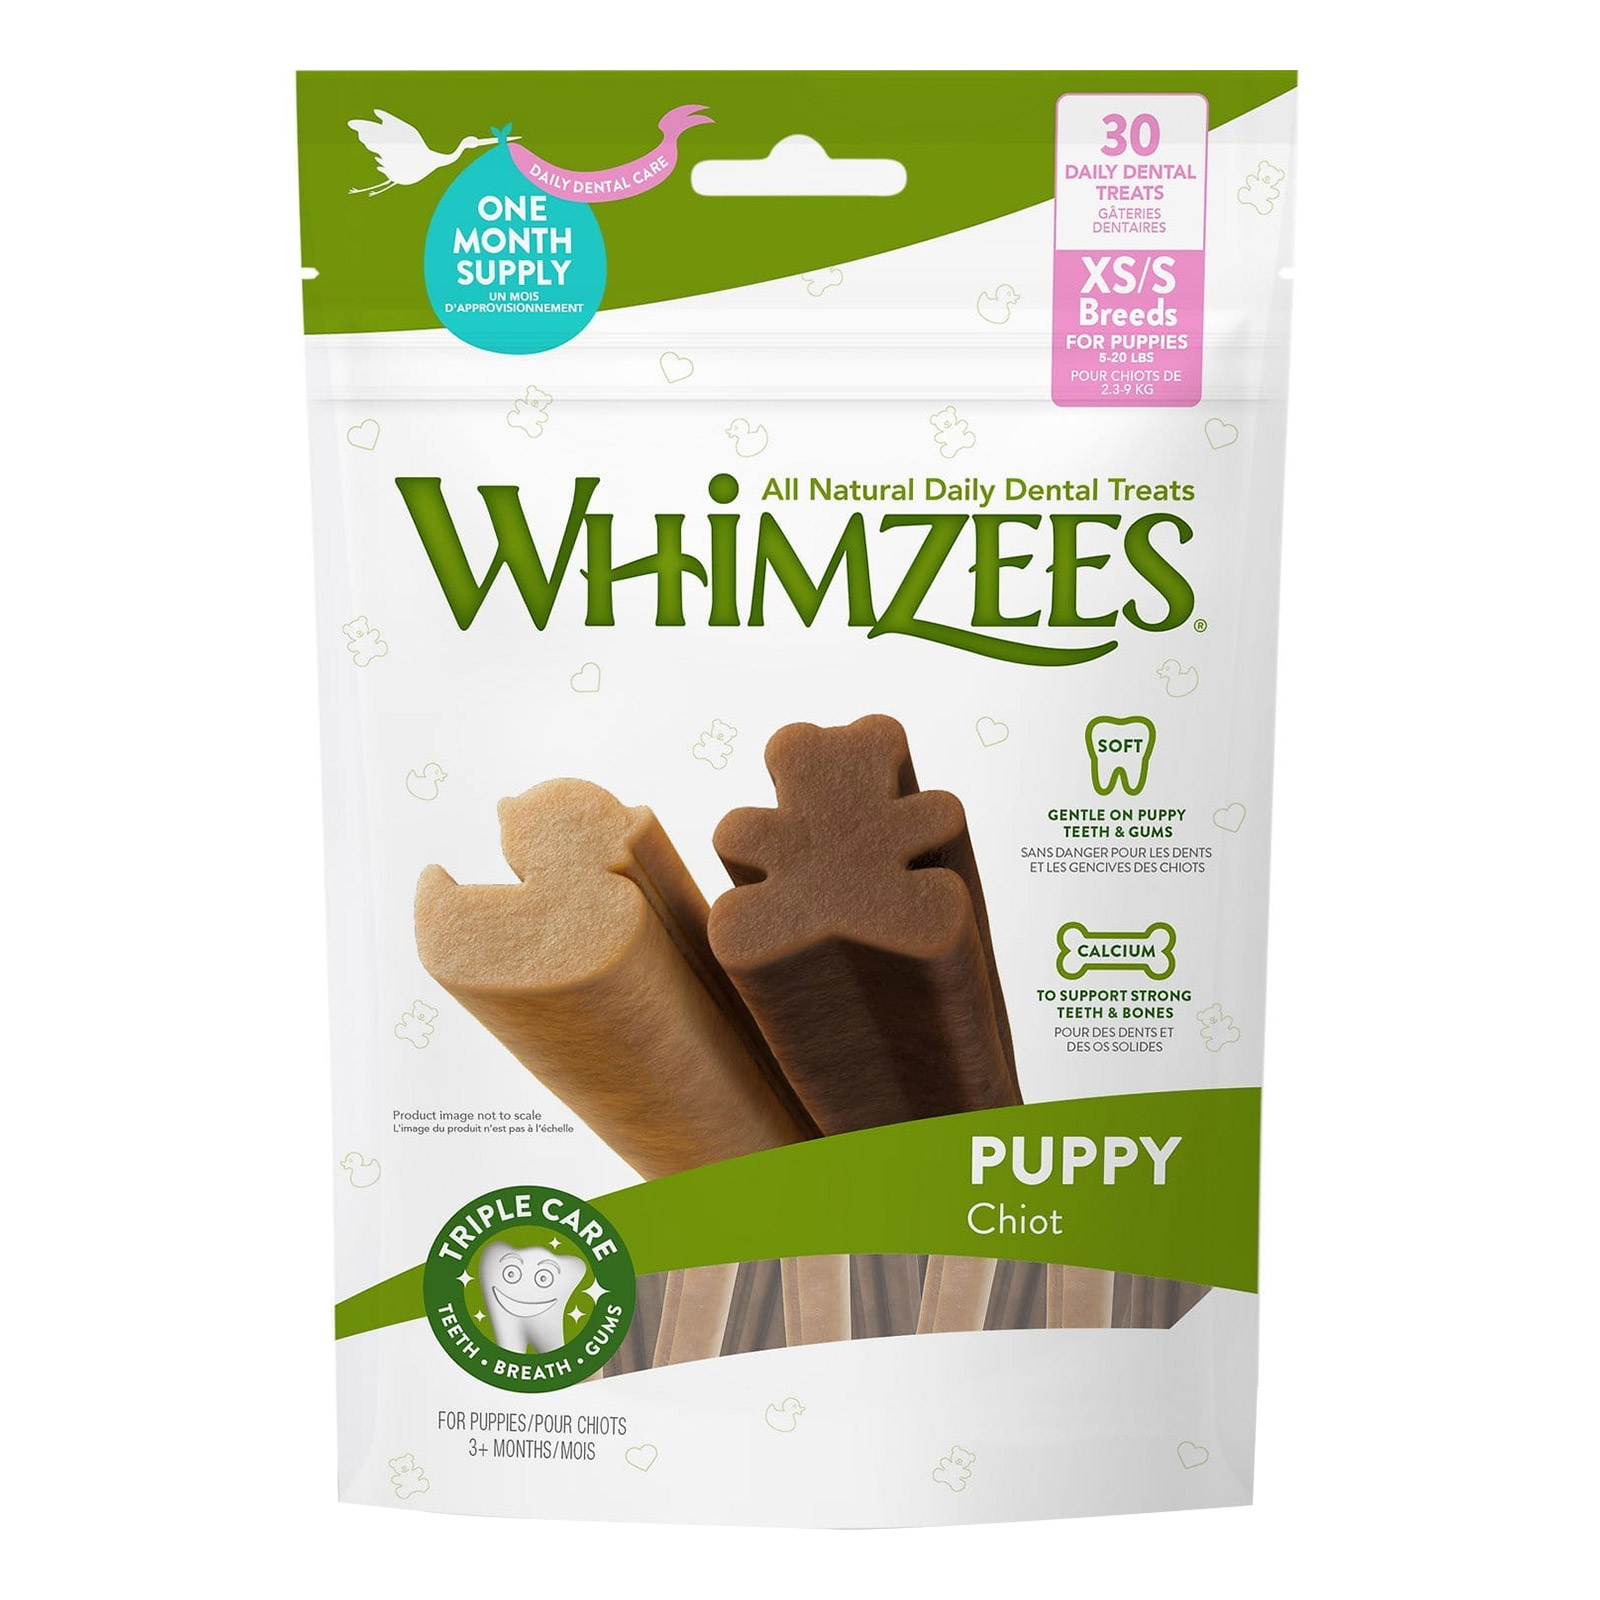 Whimzees Puppy Valuebag Dental Treat Xsmall/Small 30'S for Food